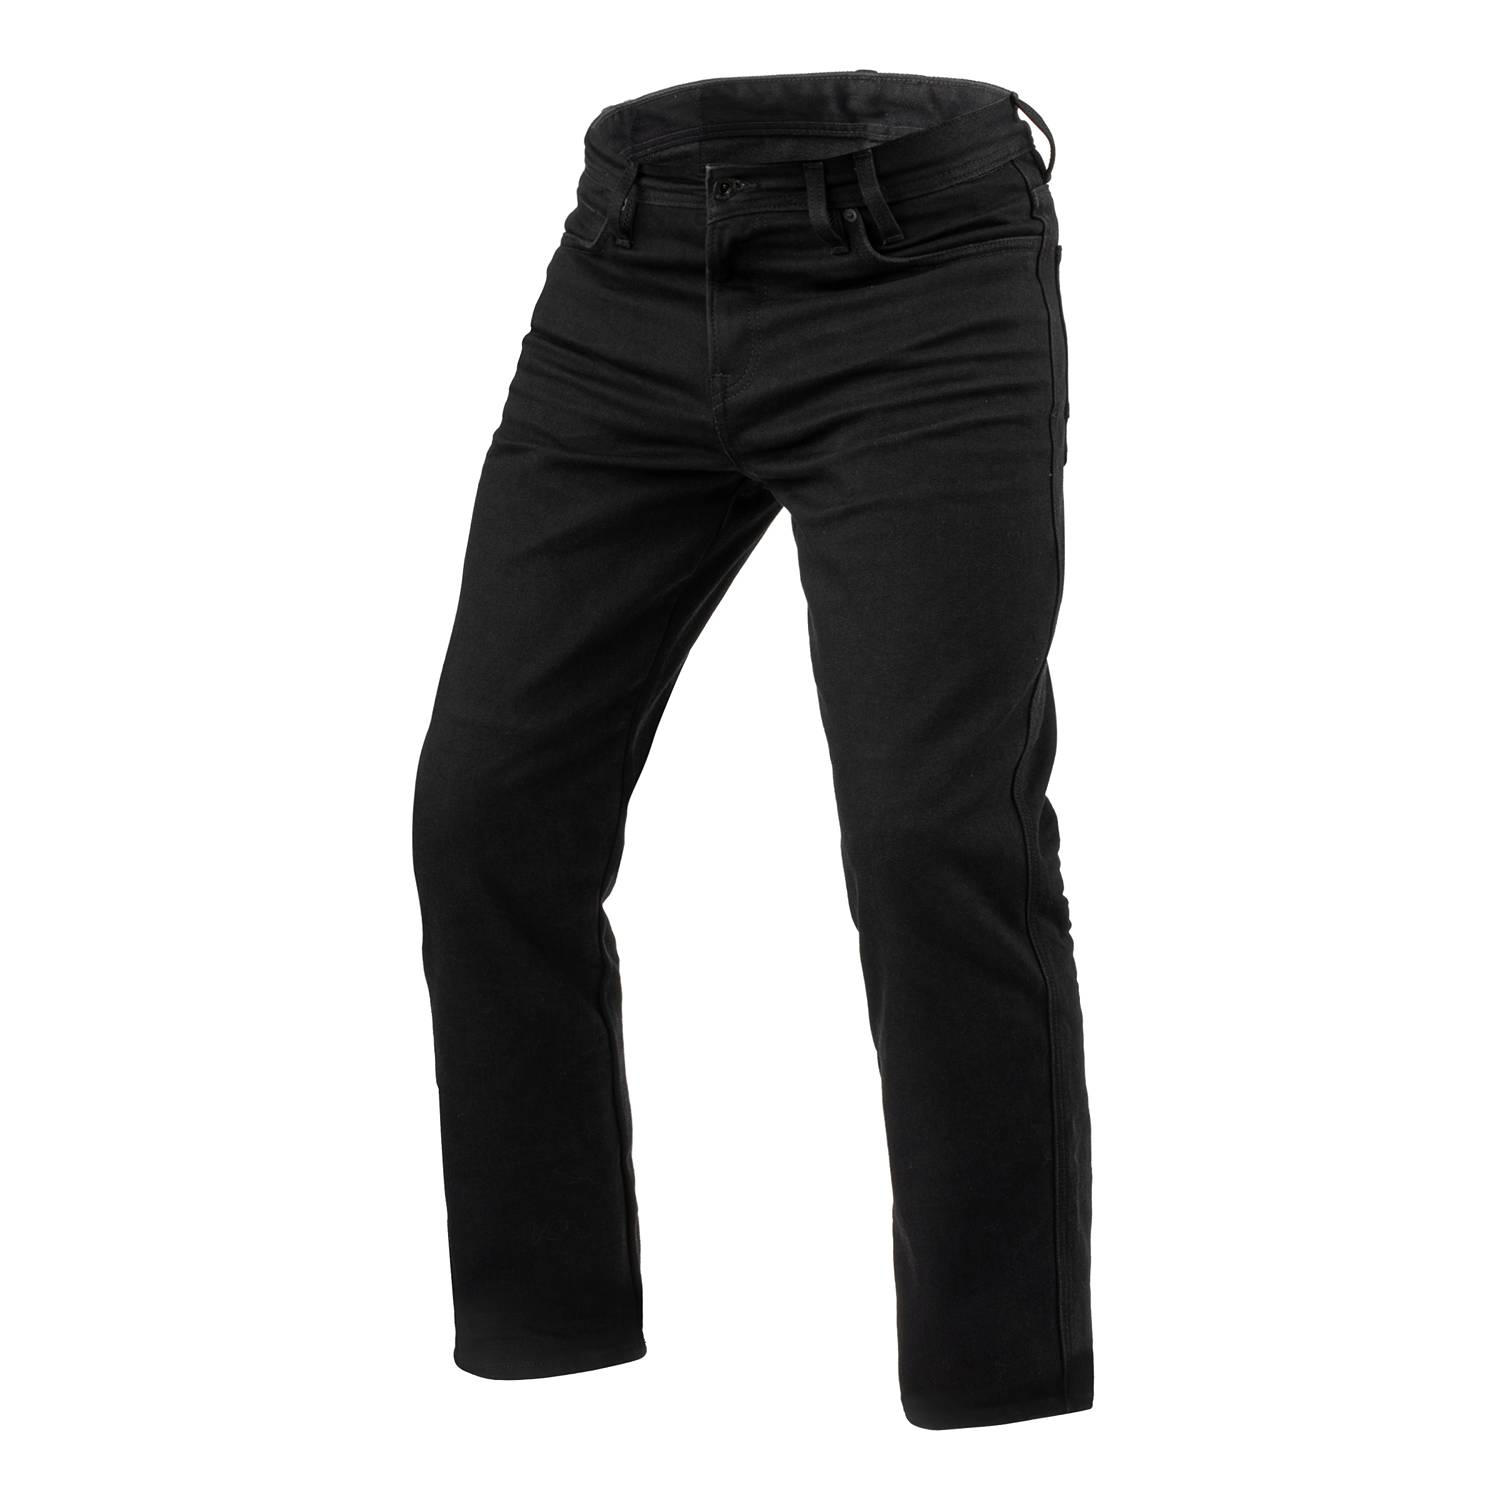 Image of REV'IT! Jeans Lombard 3 RF Black L32 Motorcycle Jeans Size L32/W31 ID 8700001375818